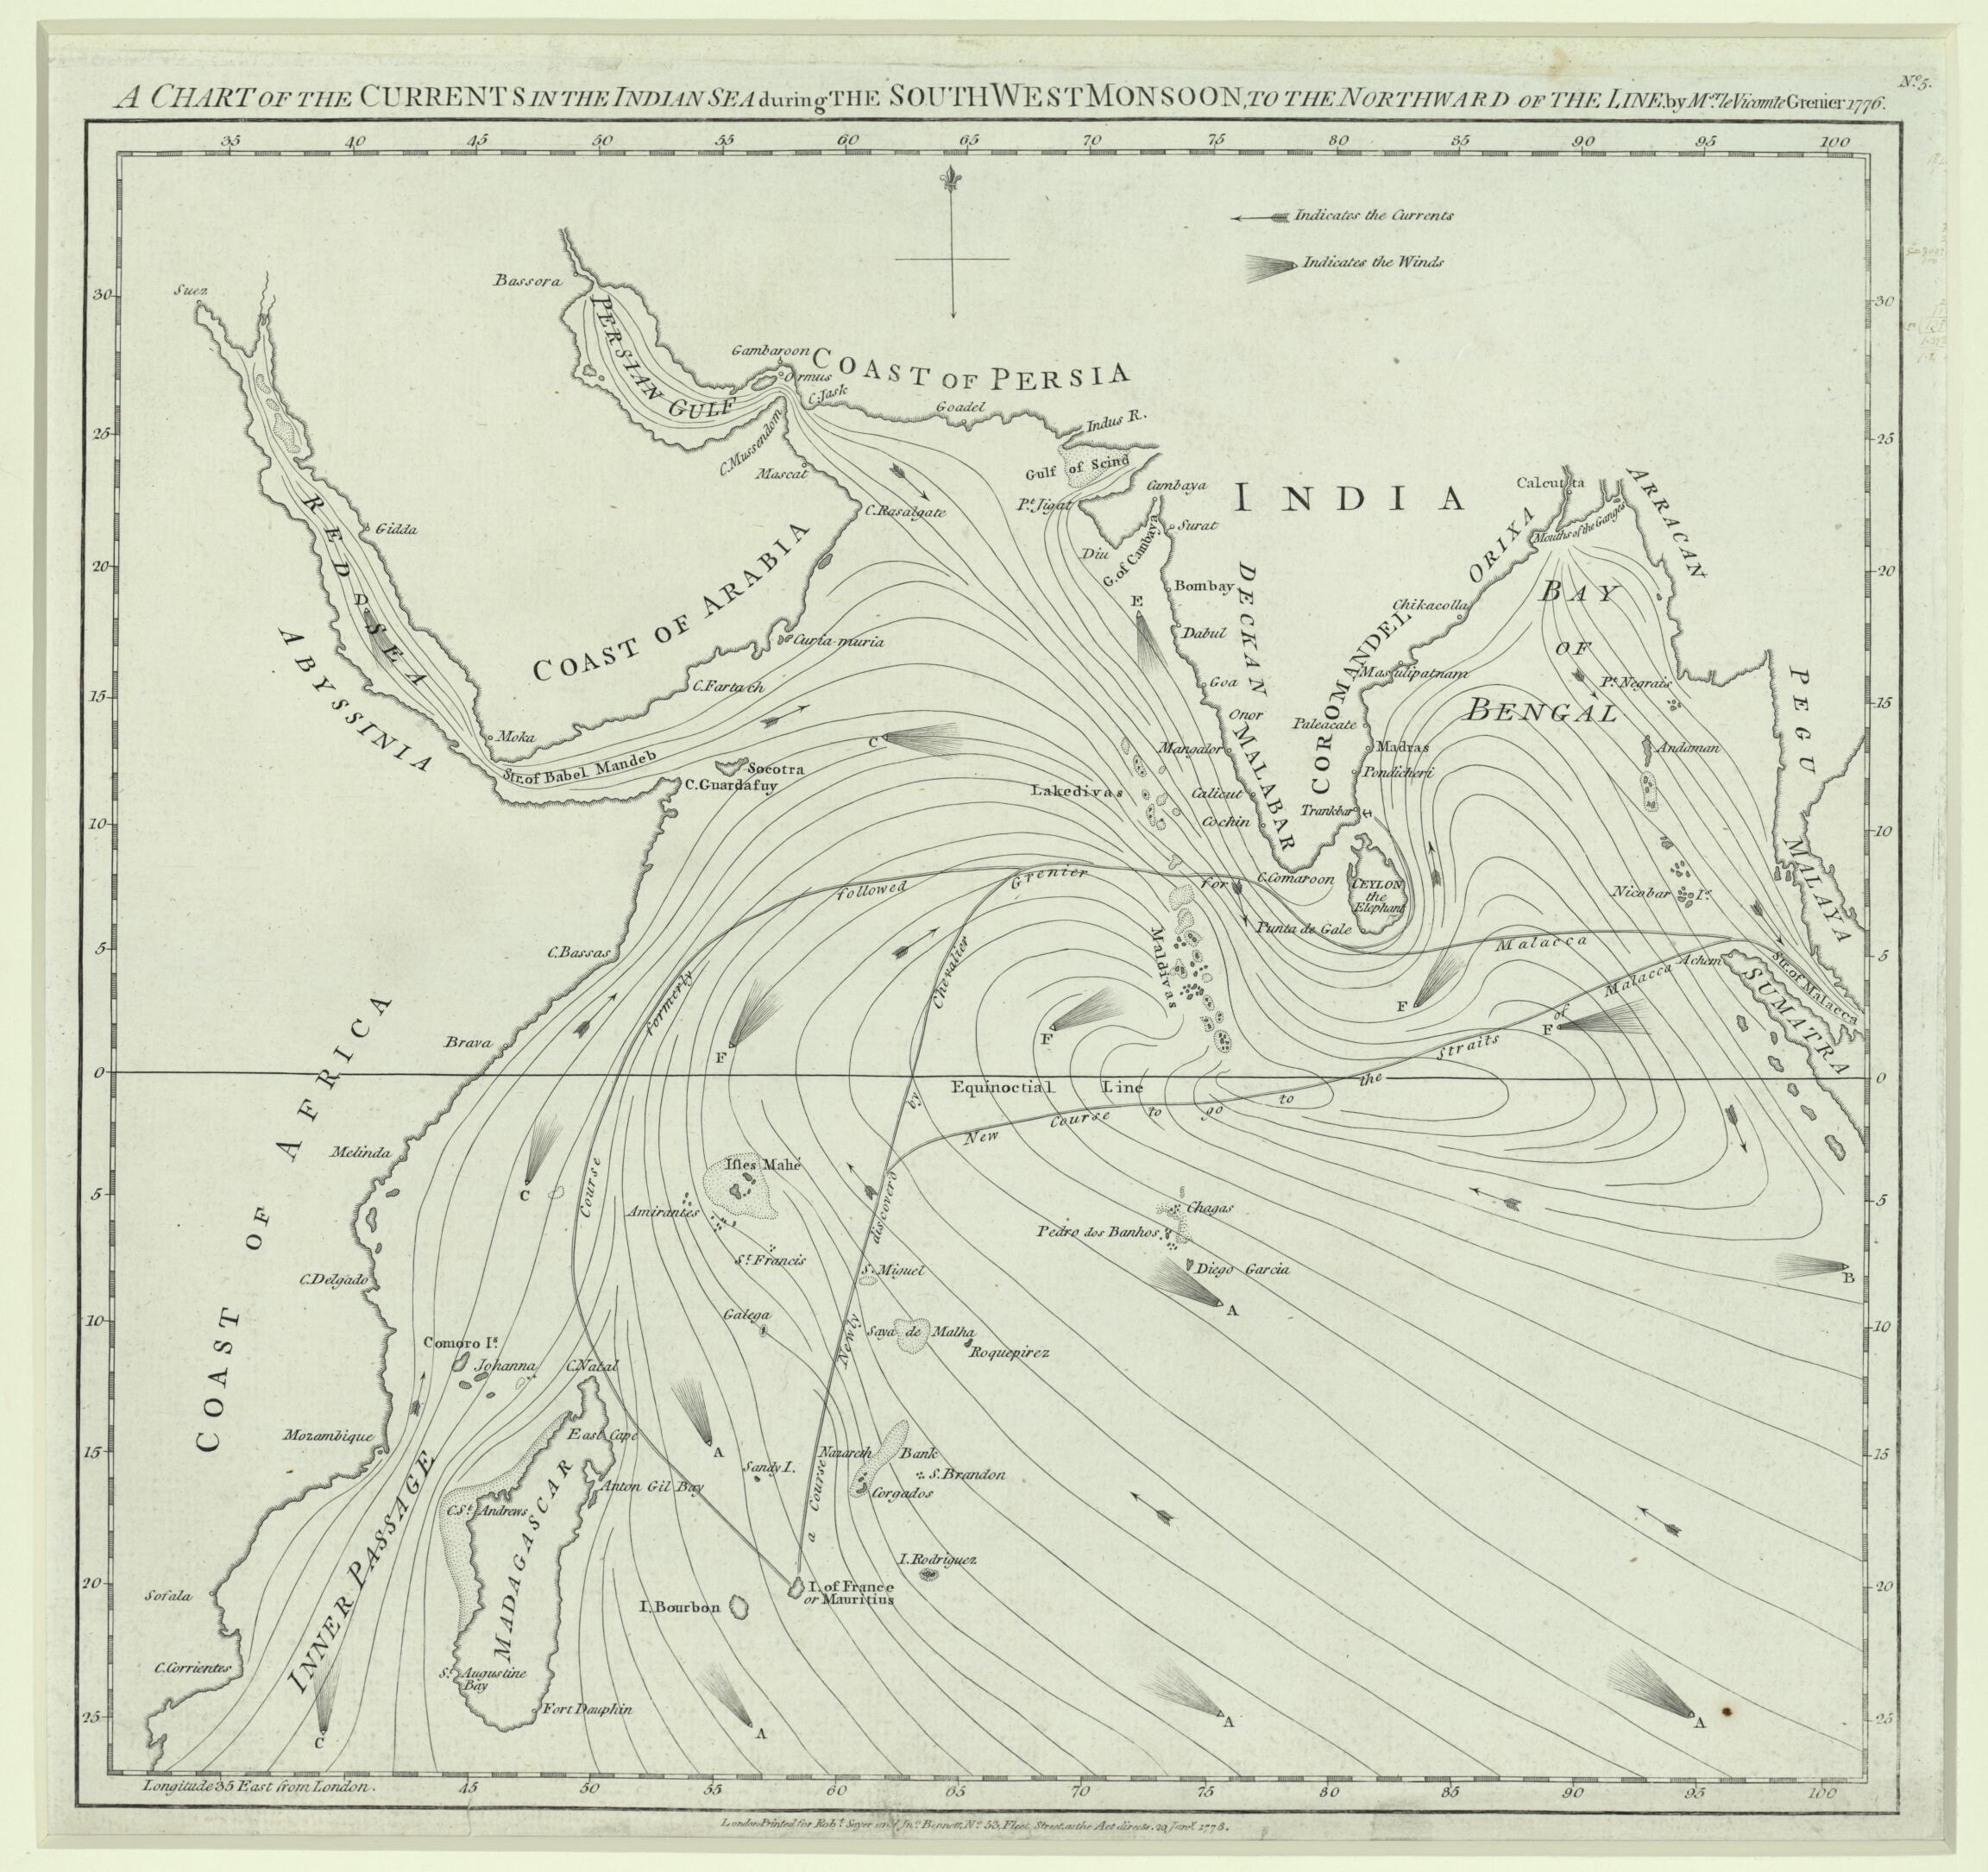 This old map of A Chart of the Currents In the Indian Sea During the Southwest Monsoon, to the Northward of the Line. (A Chart of the Currents In the Indian Sea During the Northeast Monsoon, to the Northward of the Line) from 1778 was created by Vicomte 